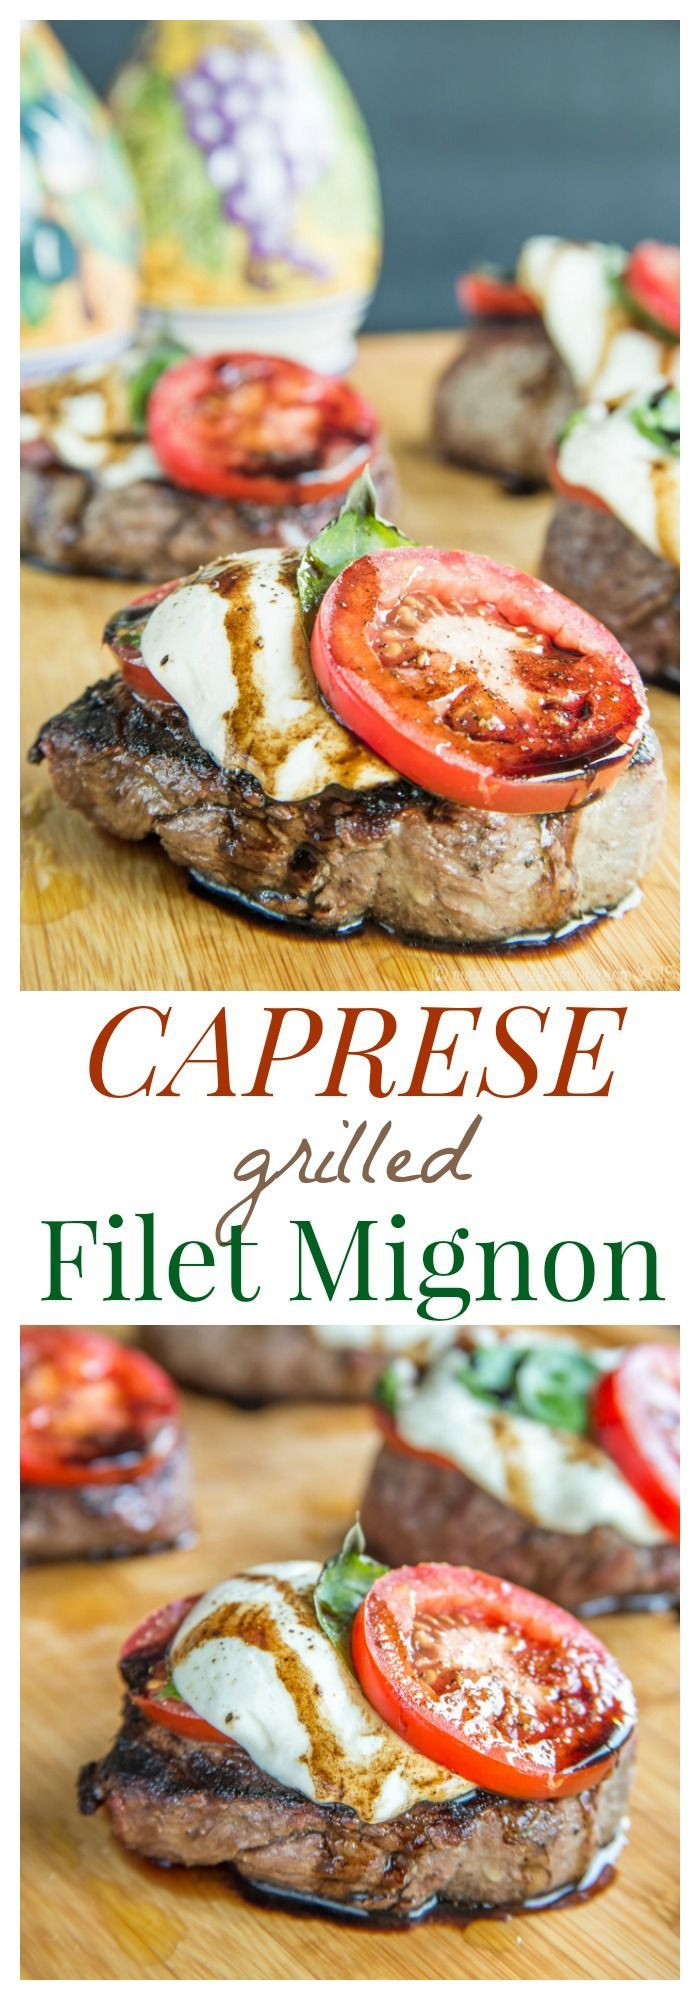 Low Carb Summer Recipes
 Best 25 Grilled steaks ideas on Pinterest